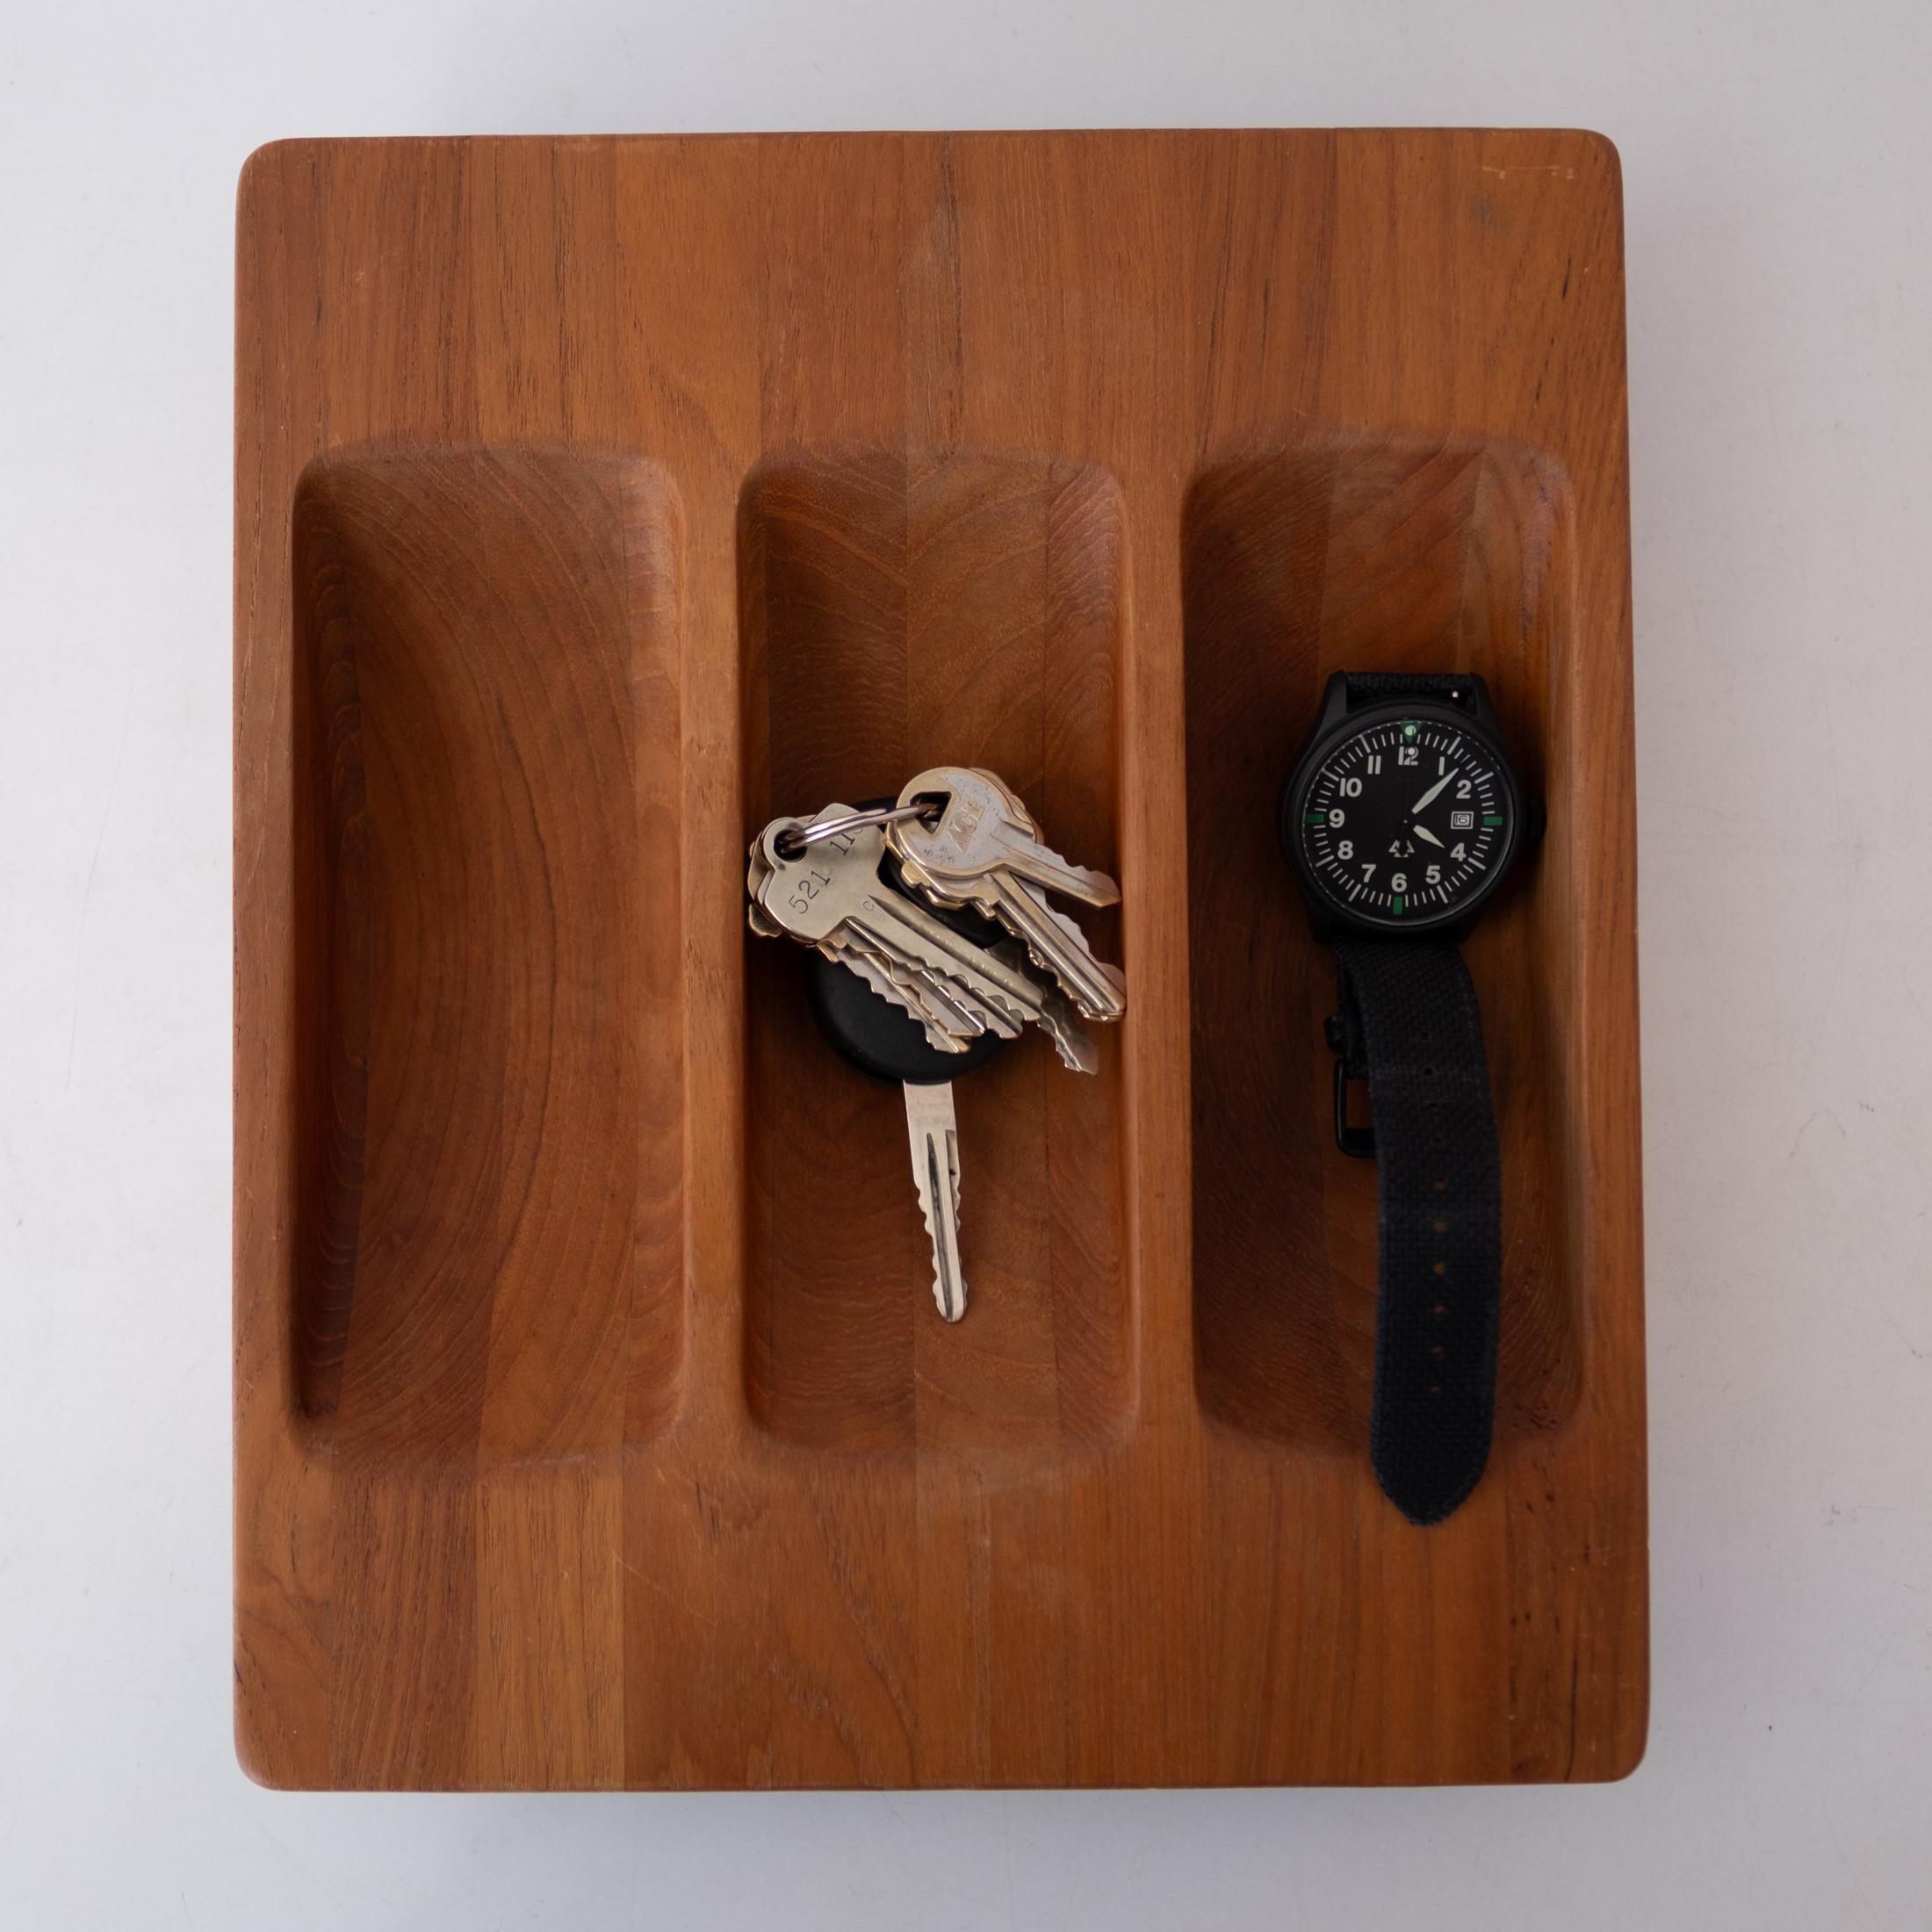 Catch all by Jens Quistgaard for Dansk. Great for a watch holder or keys. Solid teak with early Dansk mark, Denmark, 1950s.